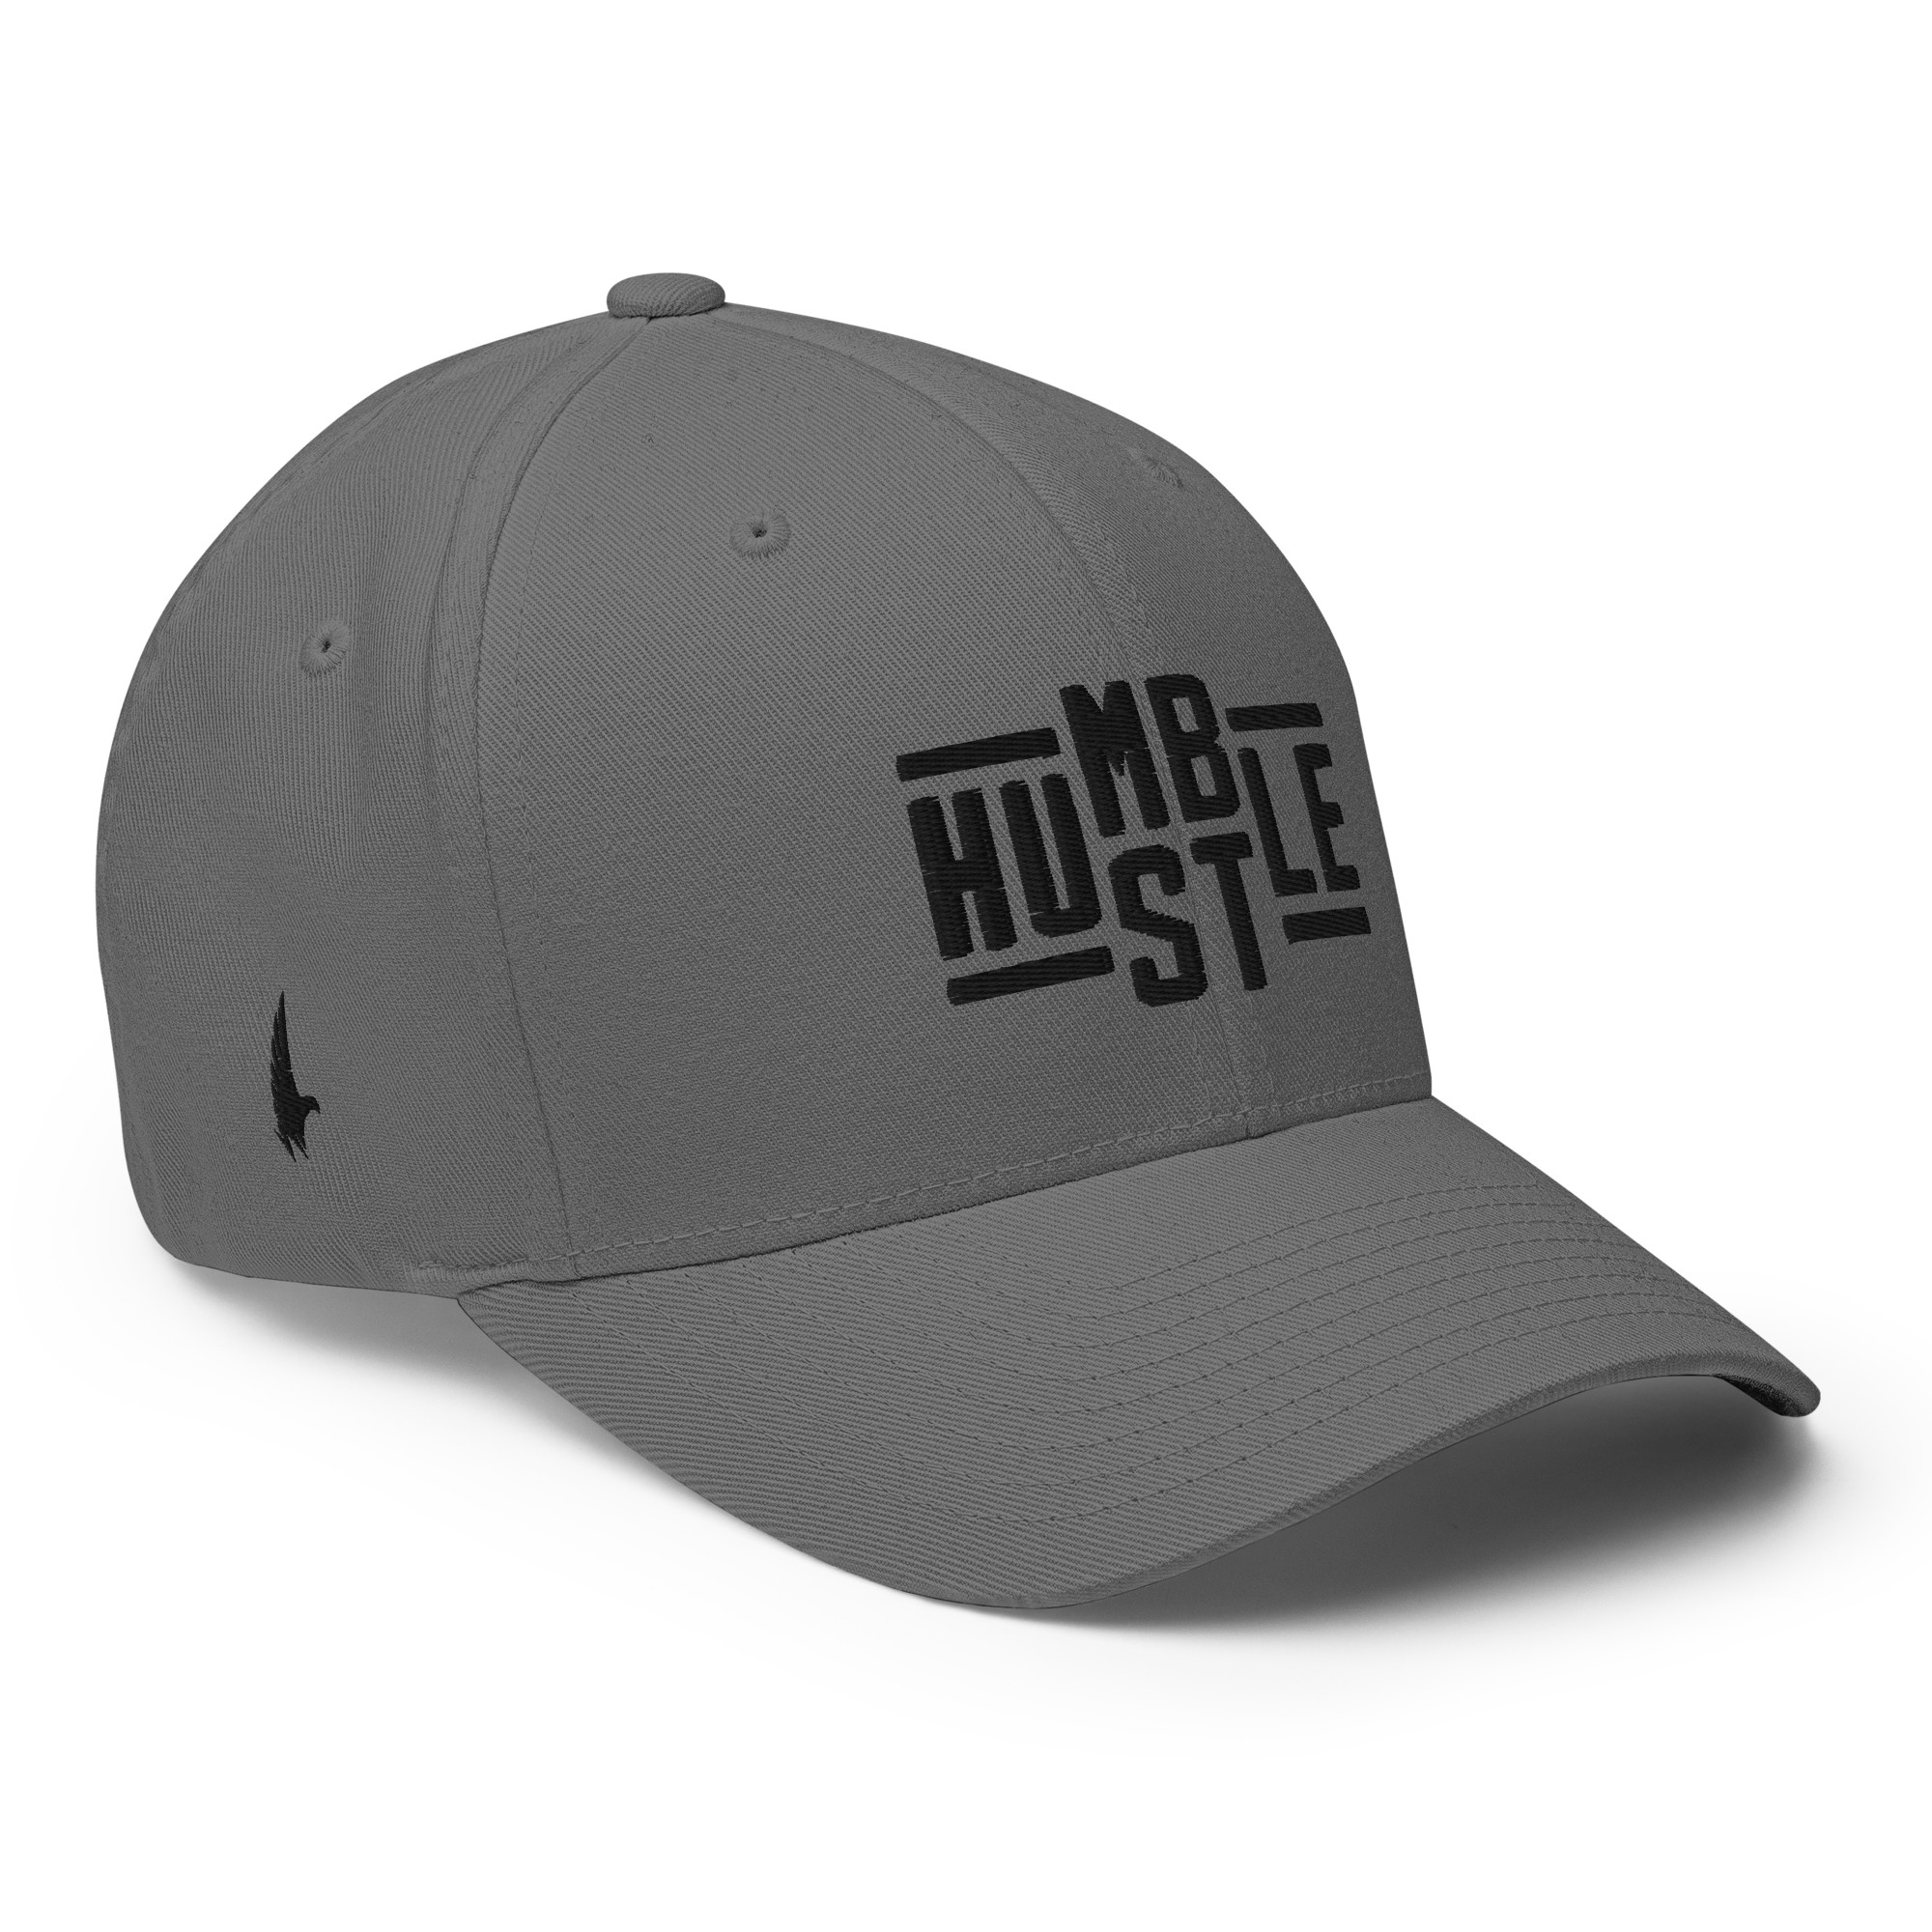 Loyalty Vibes Hustle Fitted Hat Gray / Black Fitted - Loyalty Vibes